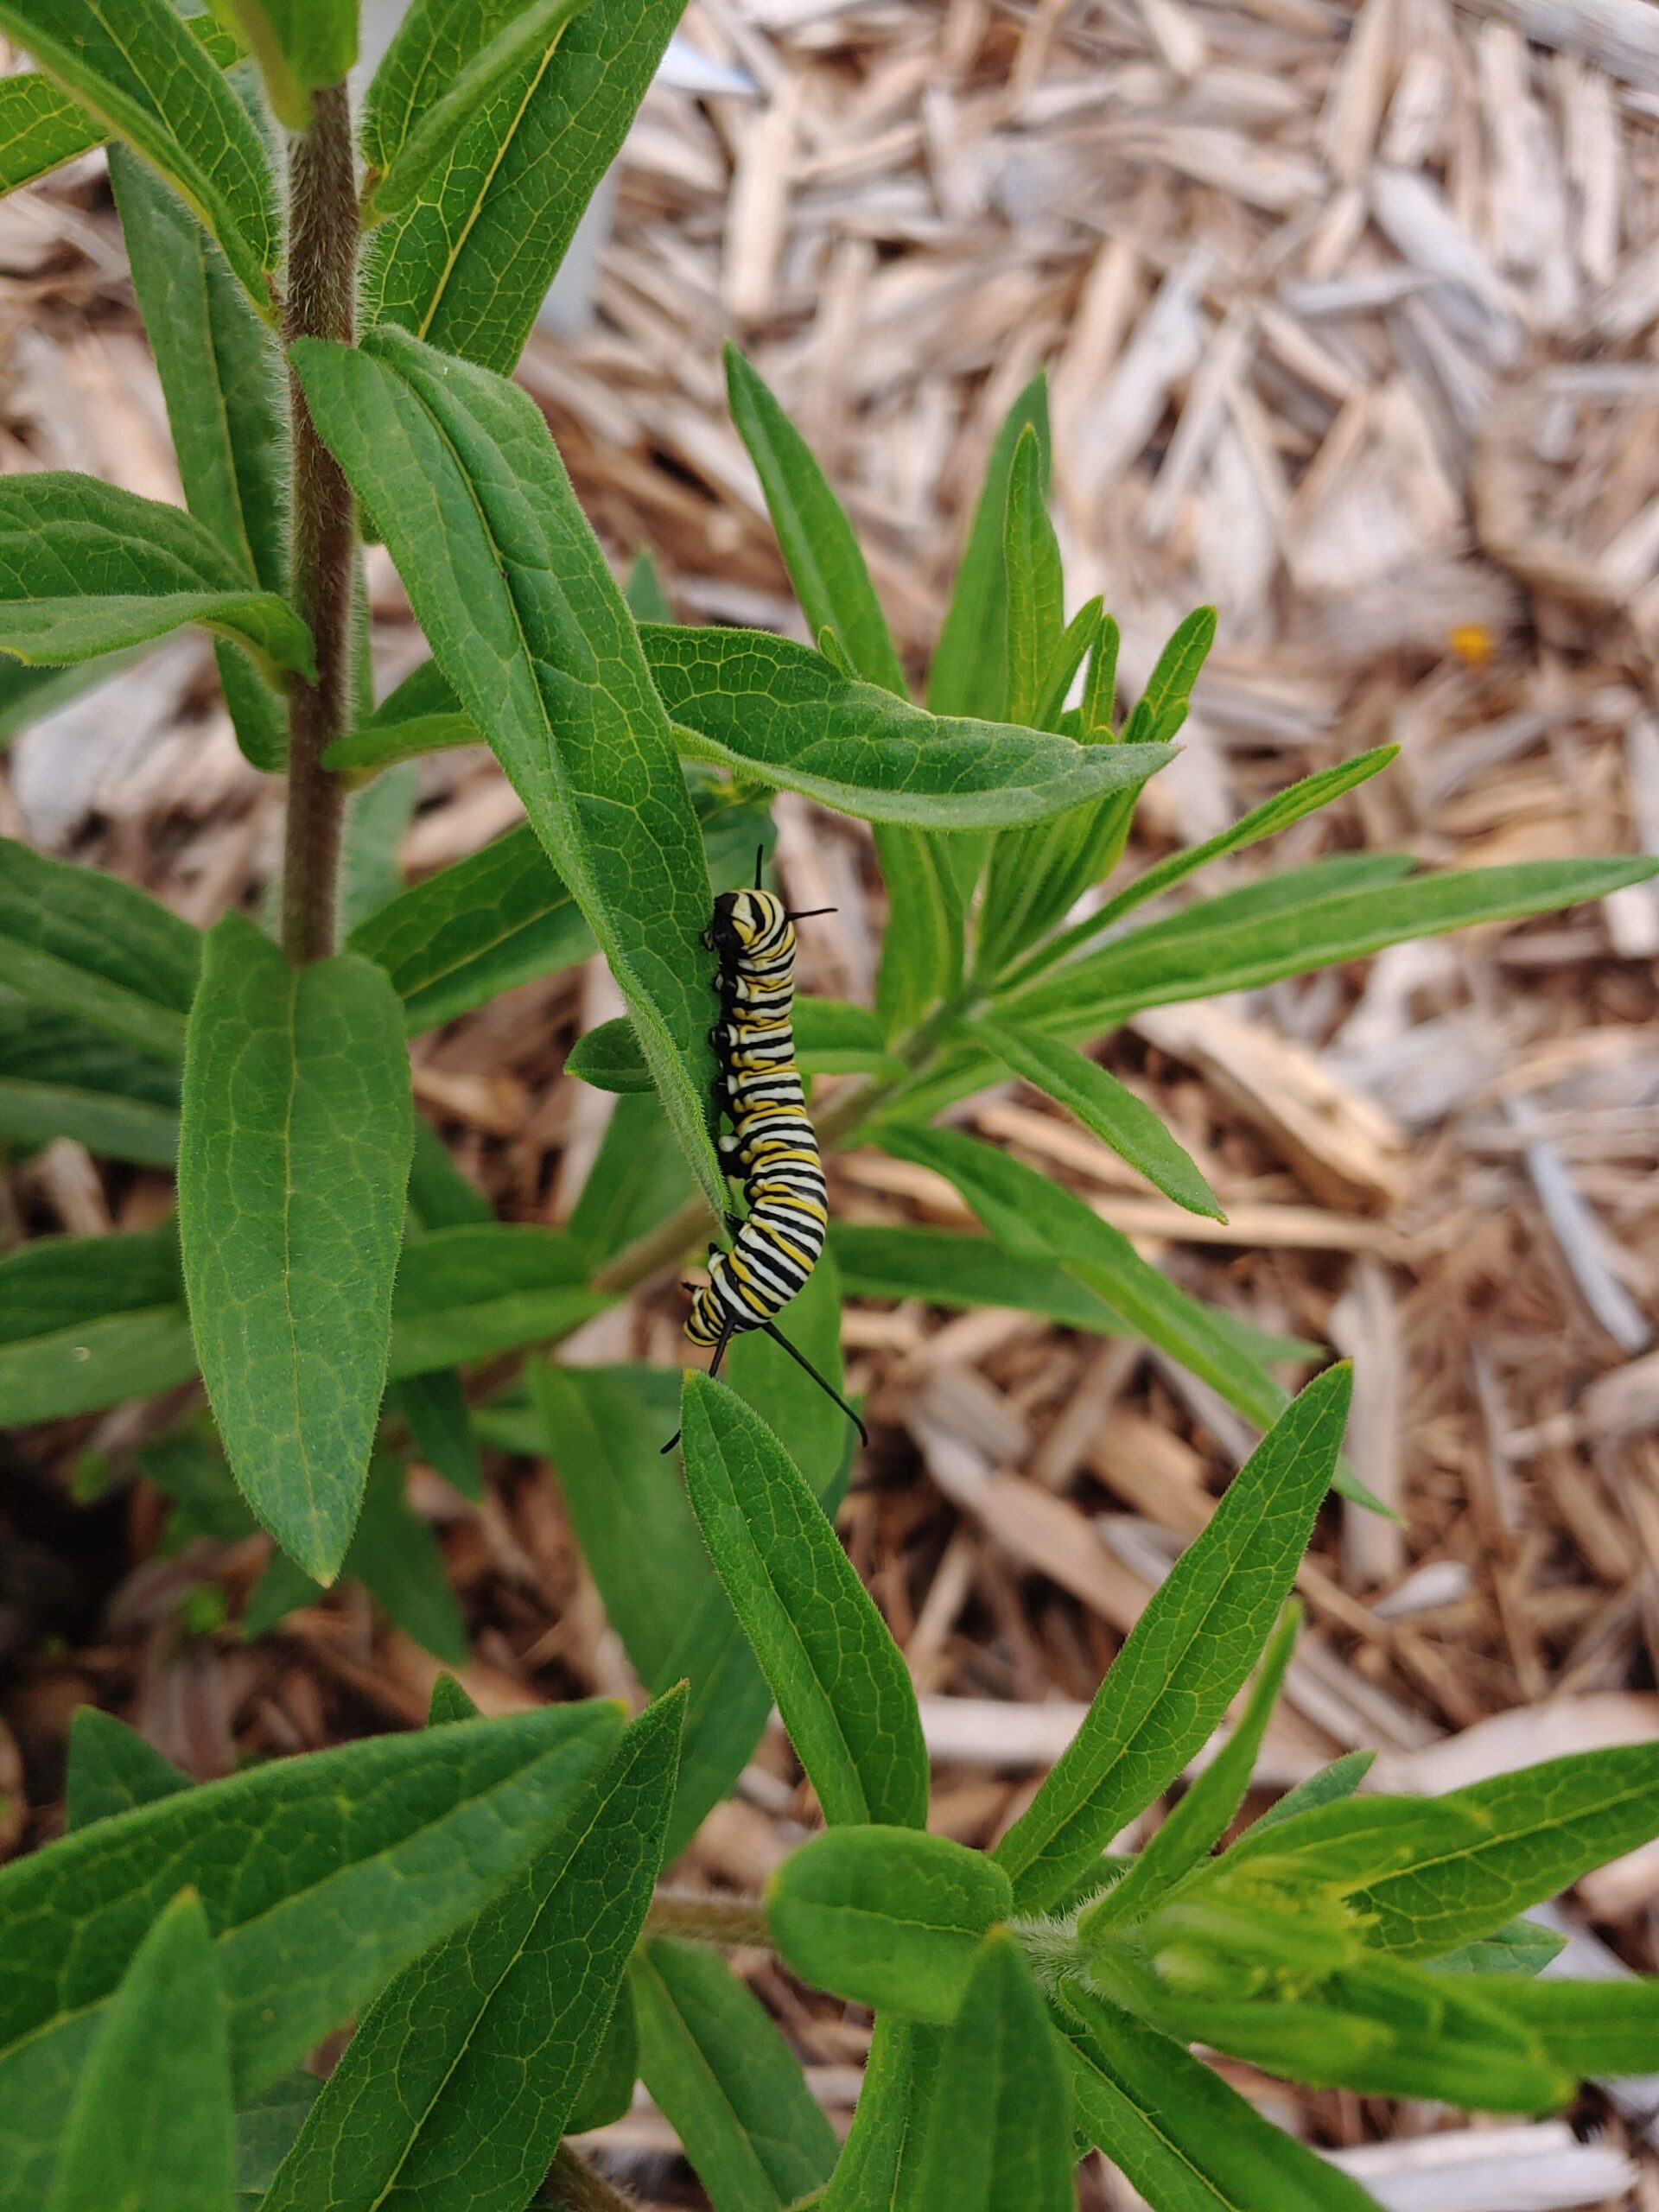 A black, white, and yellow striped monarch caterpillar on a plant with green, oblong leaves.